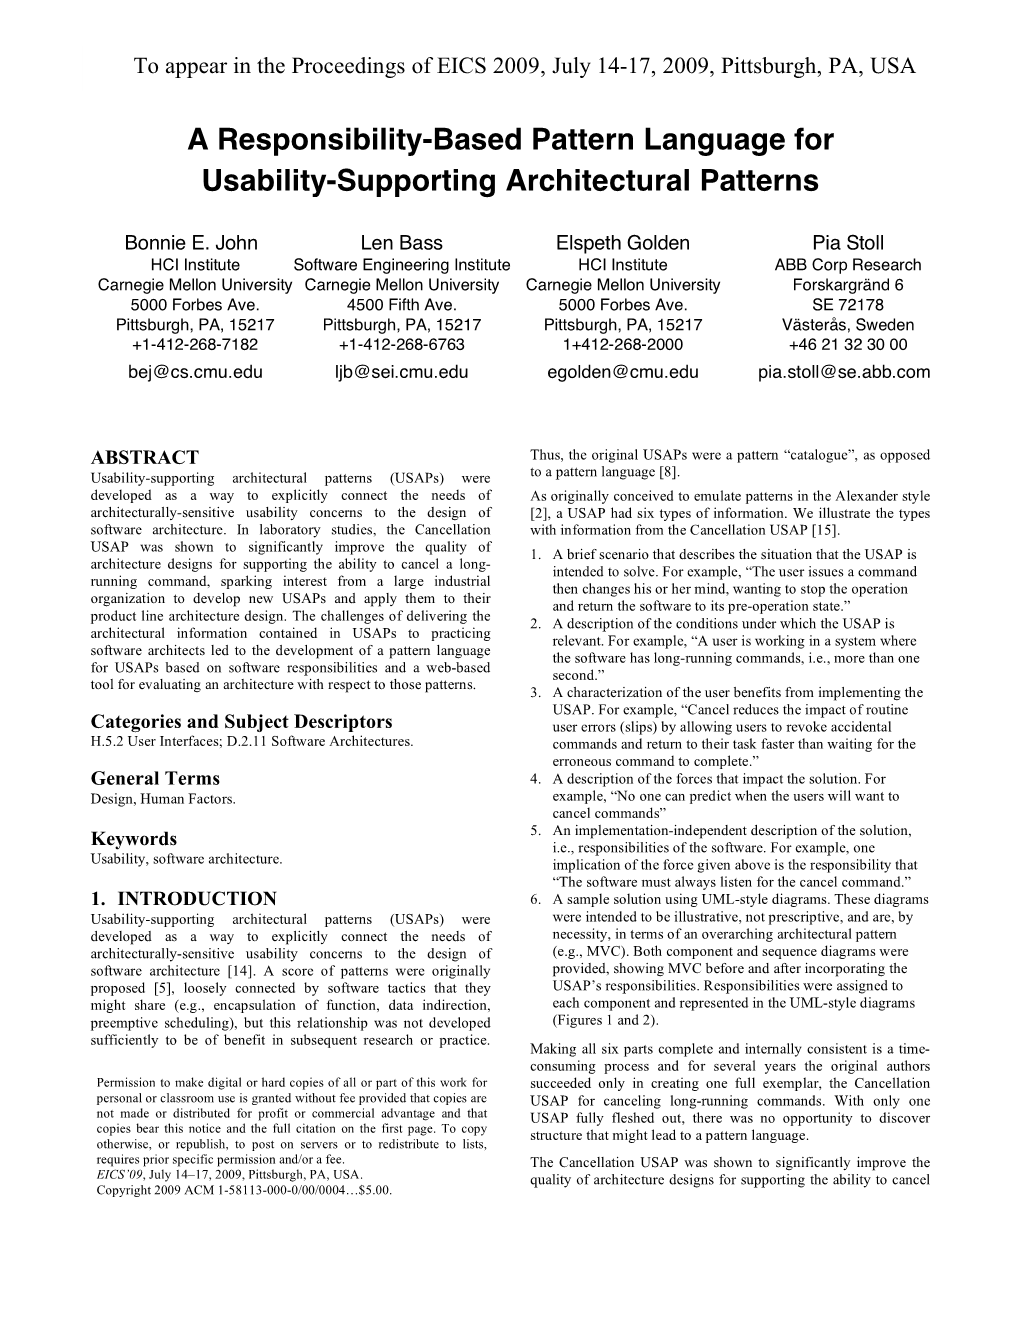 A Responsibility-Based Pattern Language for Usability-Supporting Architectural Patterns